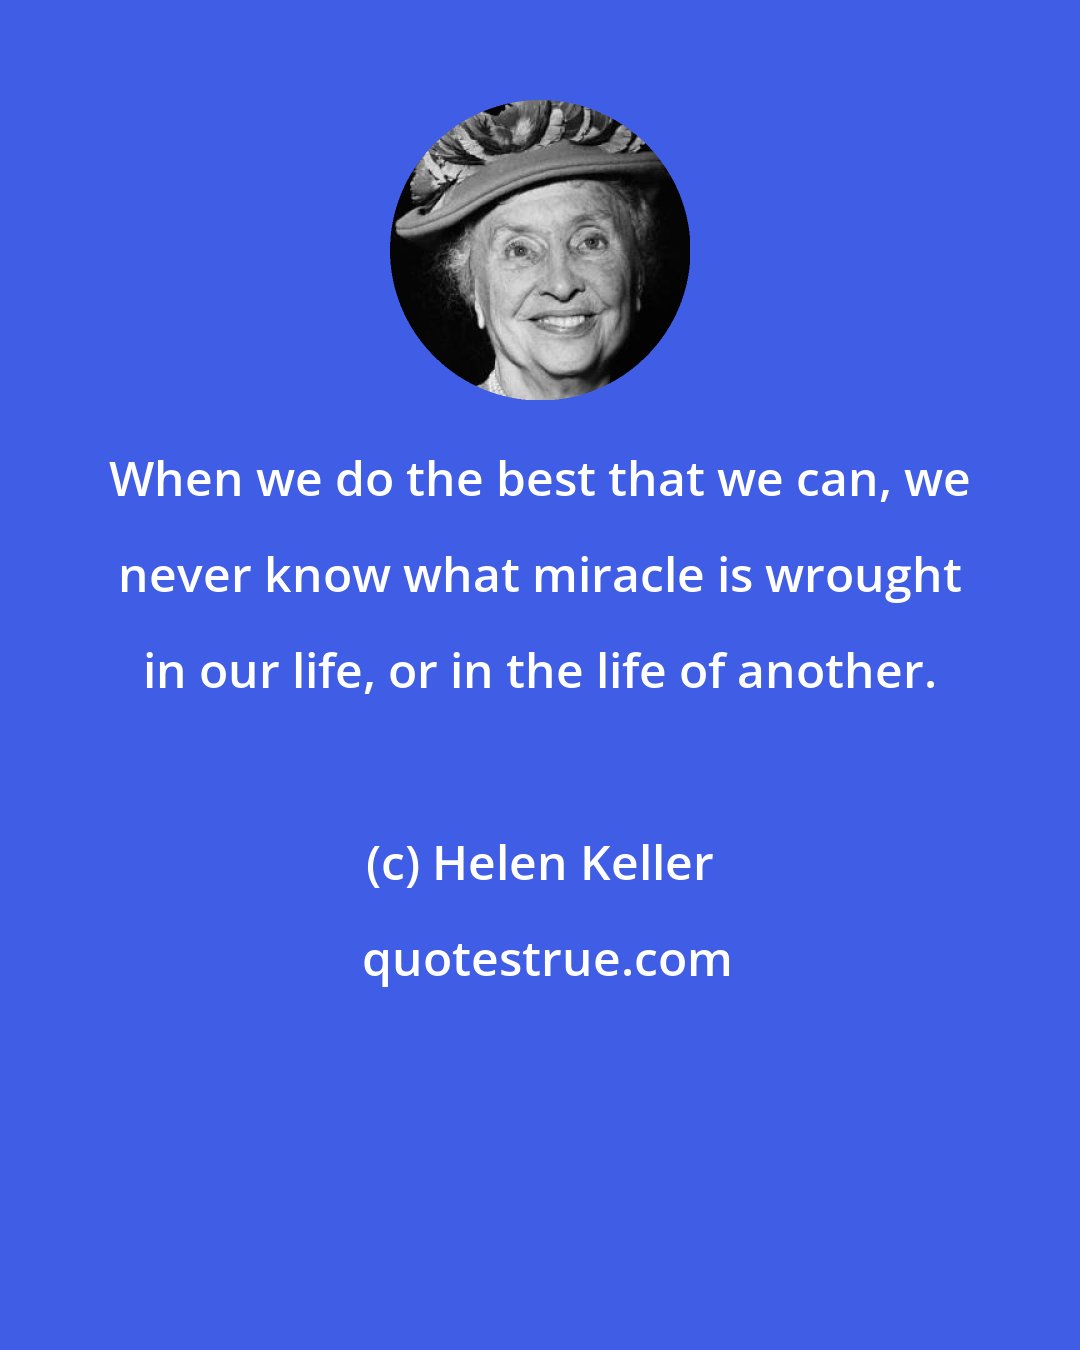 Helen Keller: When we do the best that we can, we never know what miracle is wrought in our life, or in the life of another.